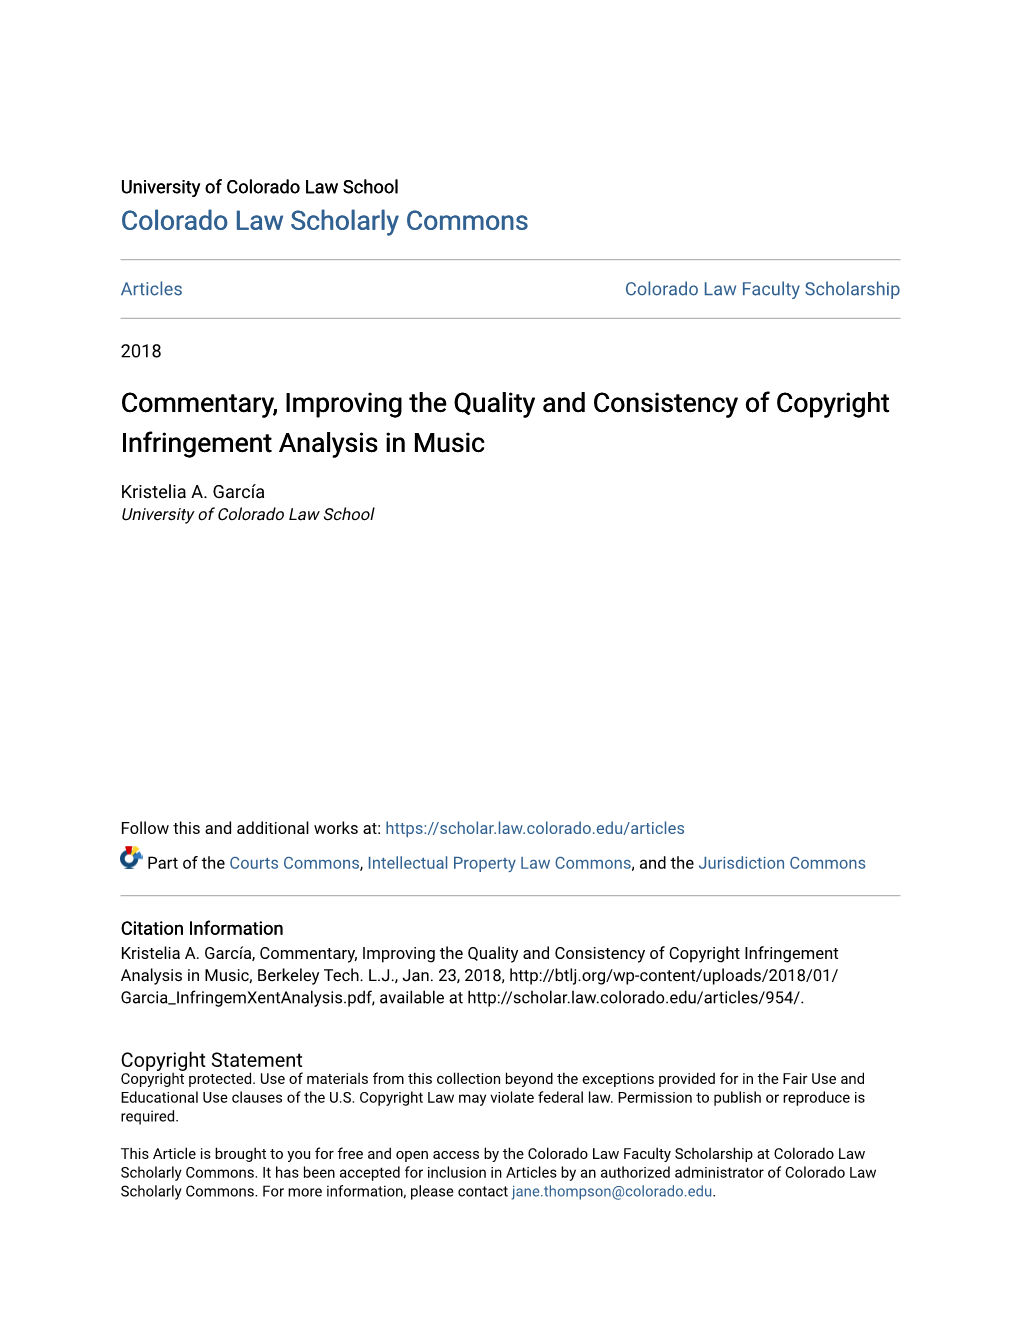 Commentary, Improving the Quality and Consistency of Copyright Infringement Analysis in Music